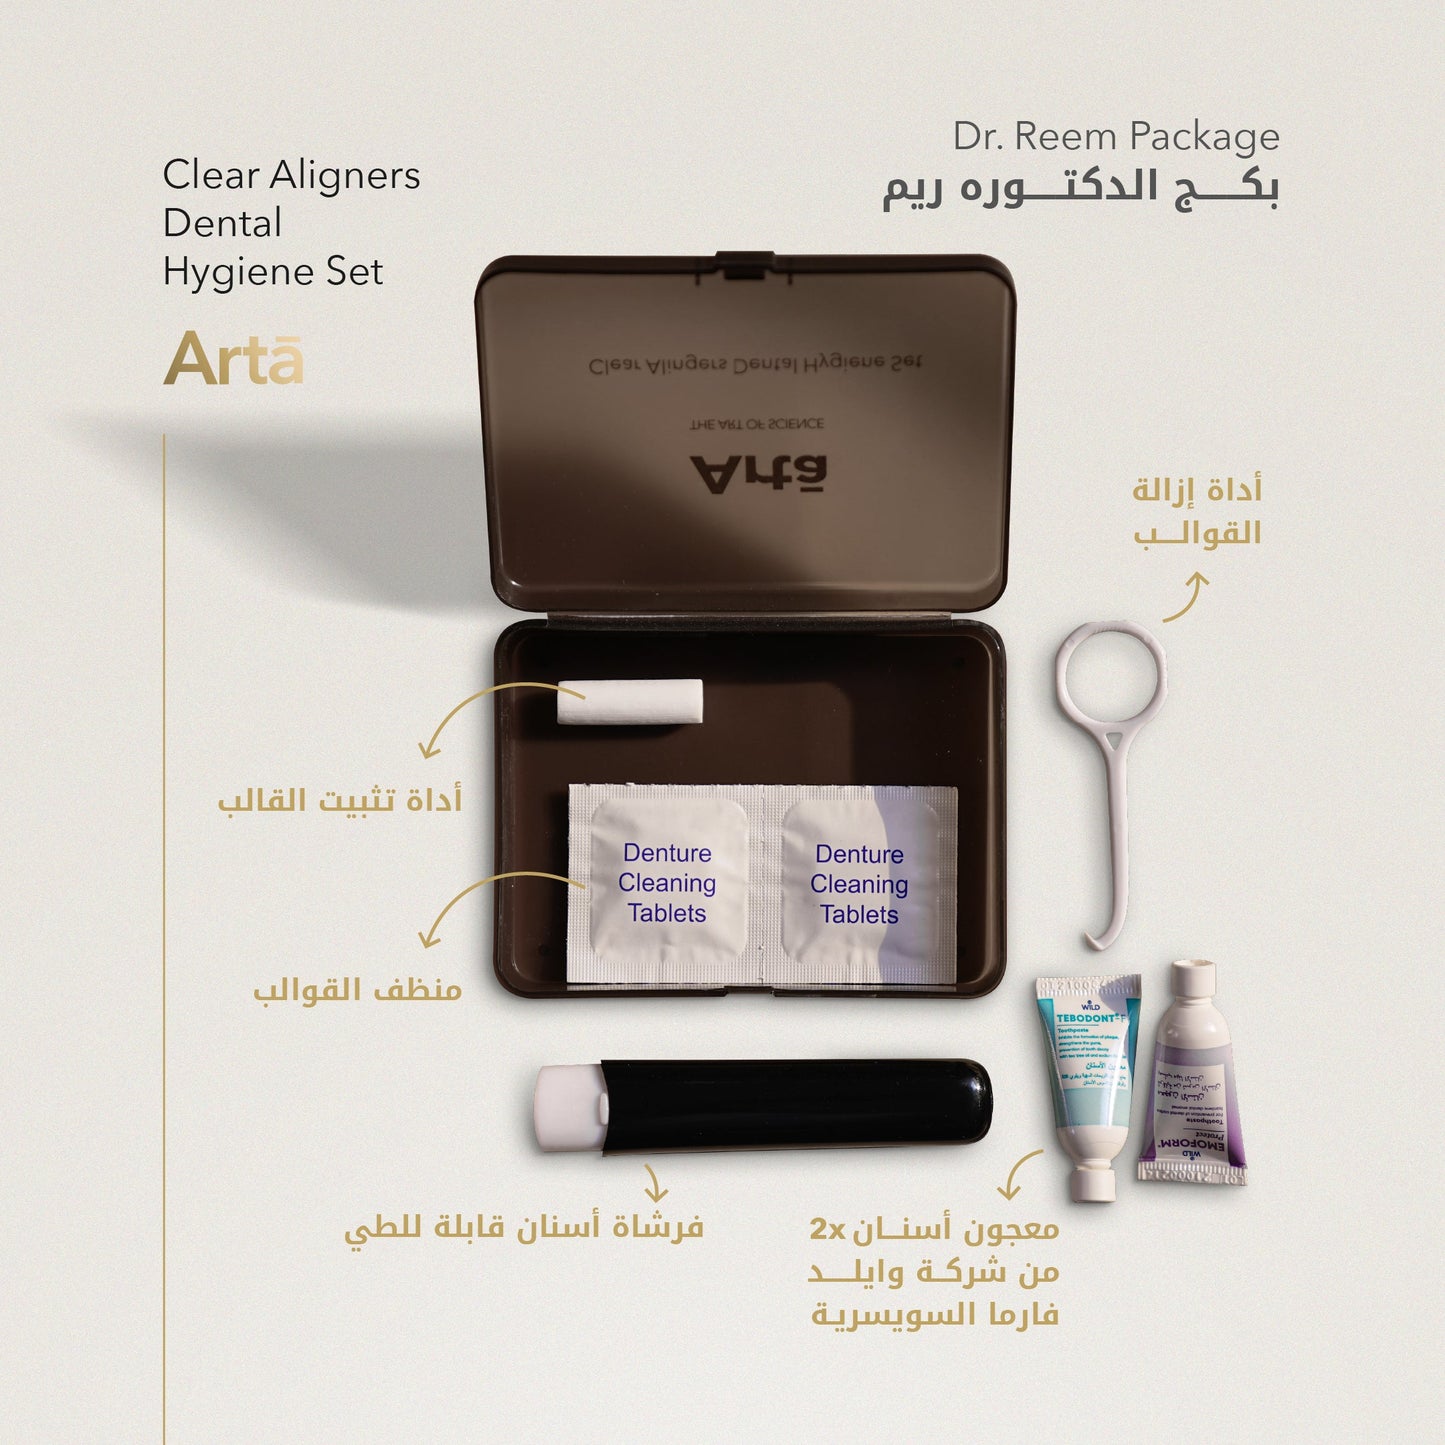 Dr. Reem's Package 2